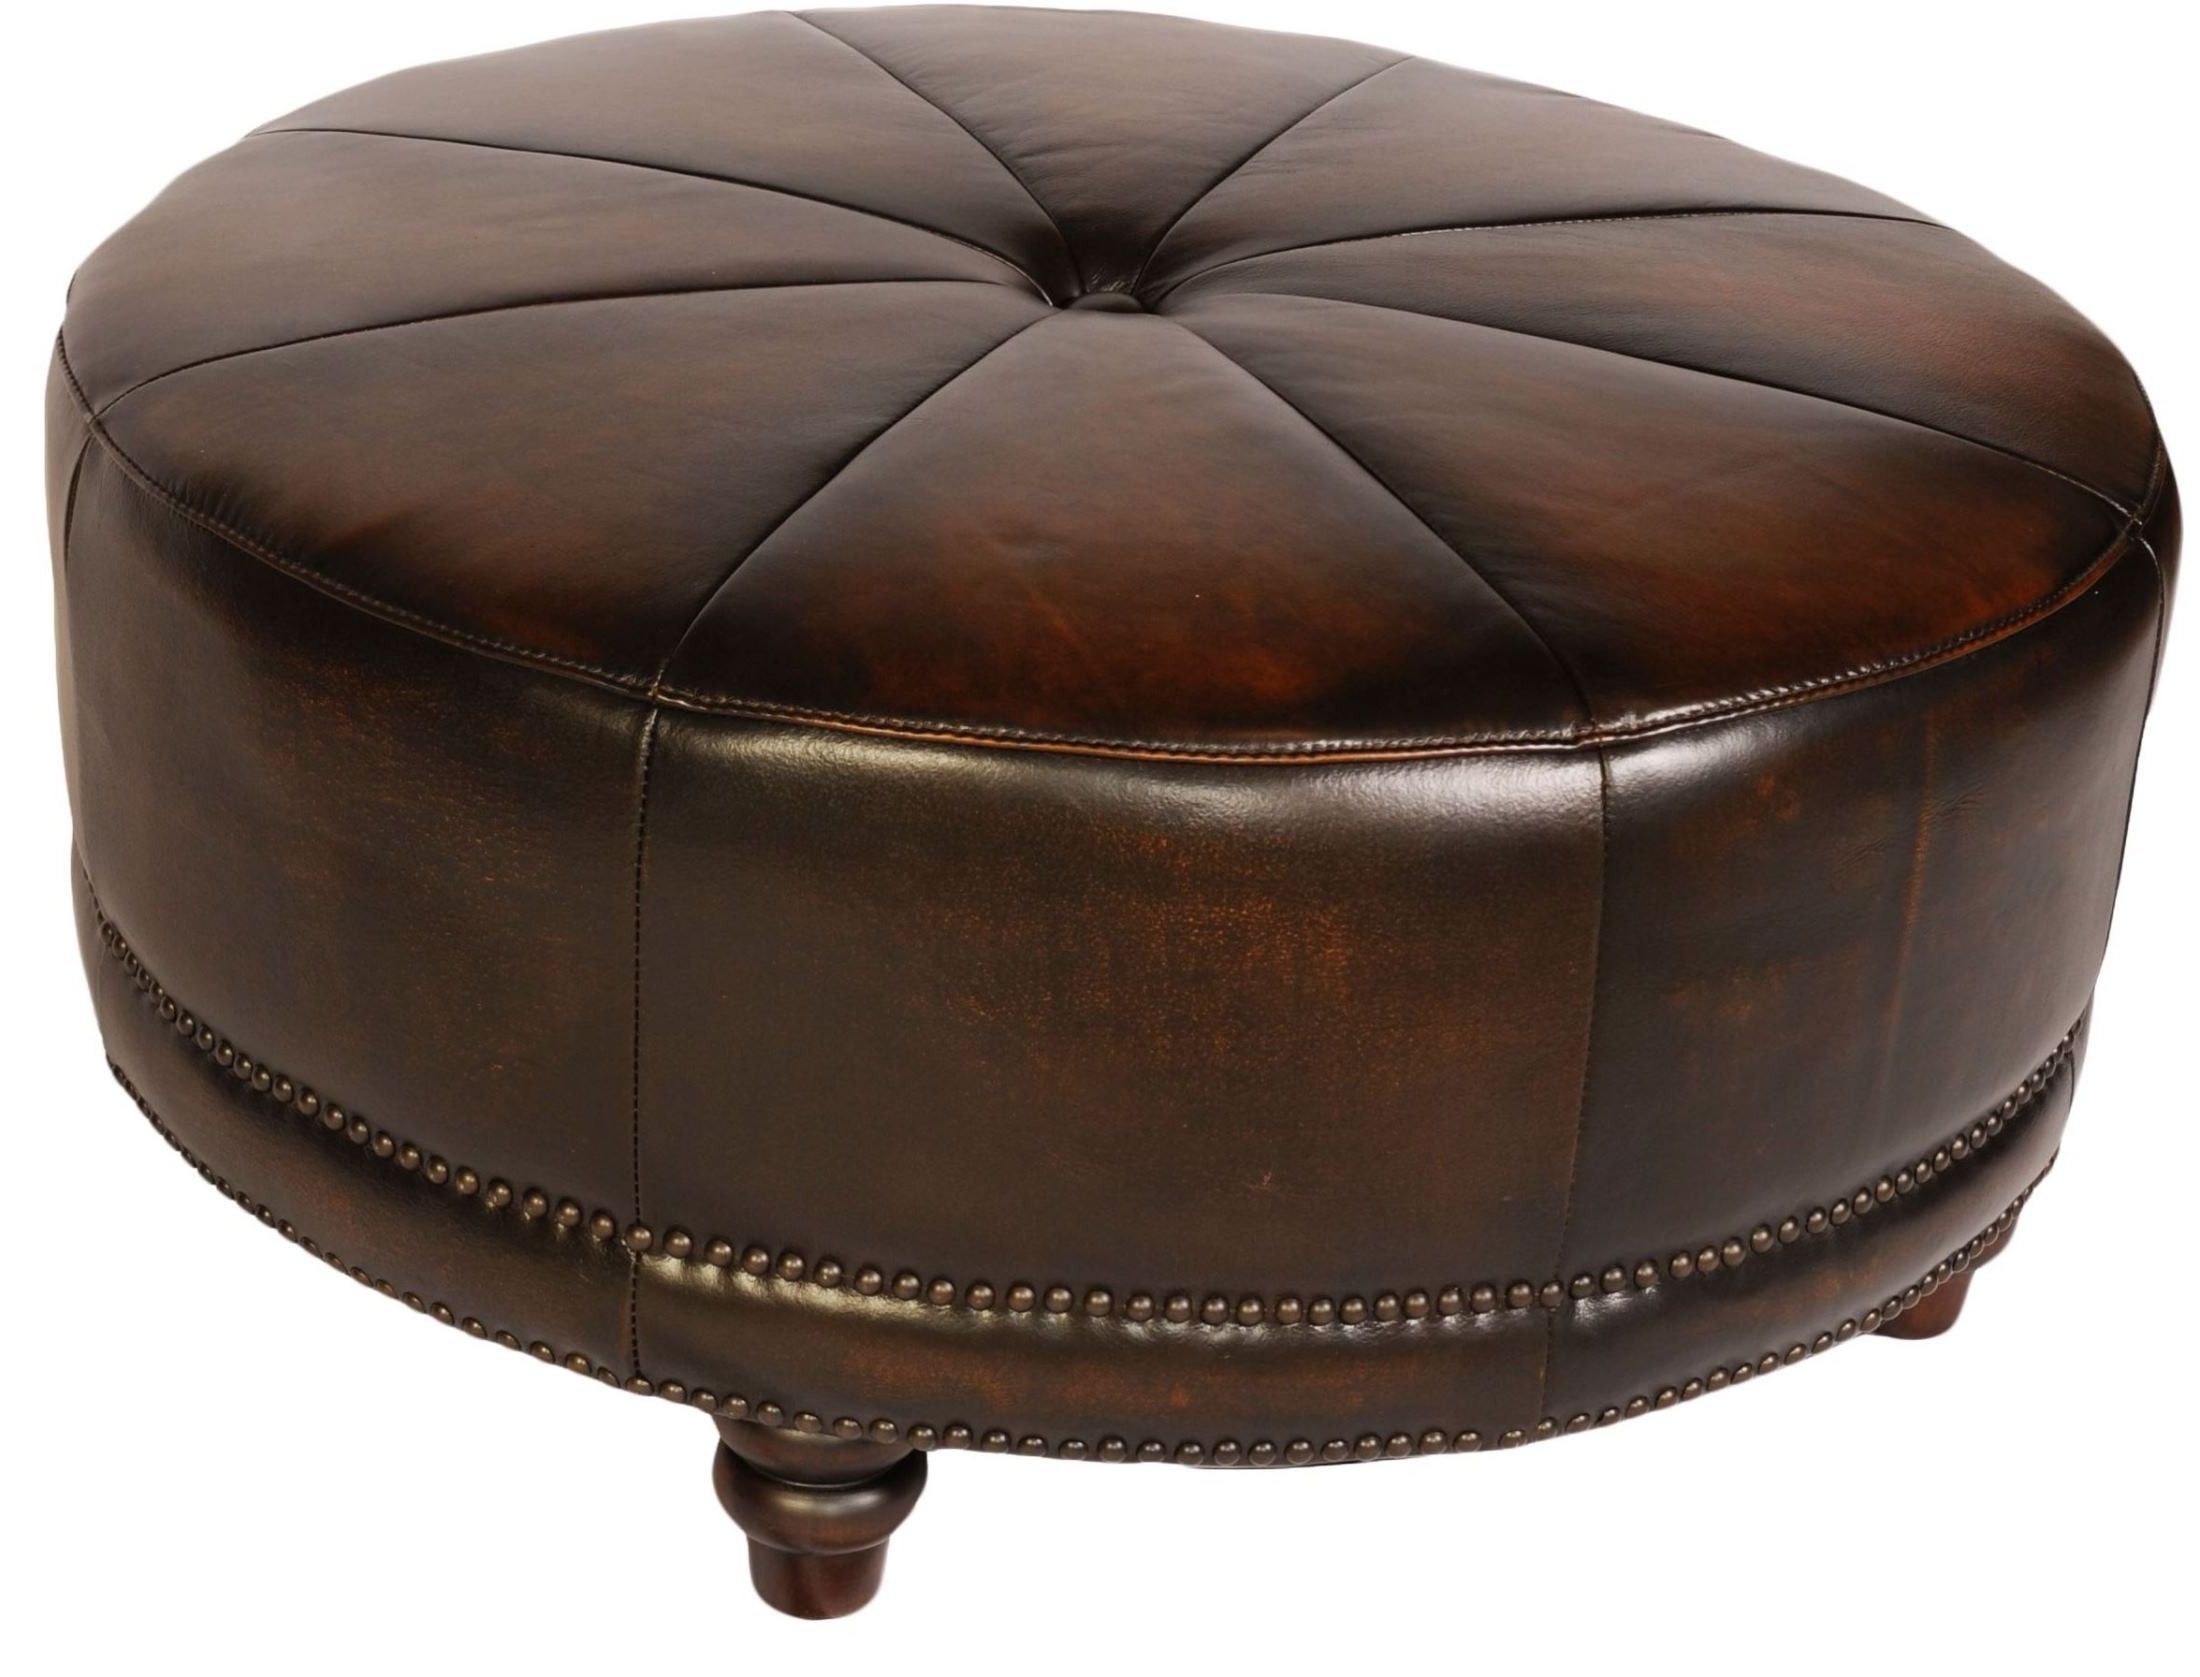 Silver And White Leather Round Ottomans With Best And Newest Cindy Black & Tan Leather Round Ottoman From Lazzaro (wh F371 3358b (View 1 of 10)